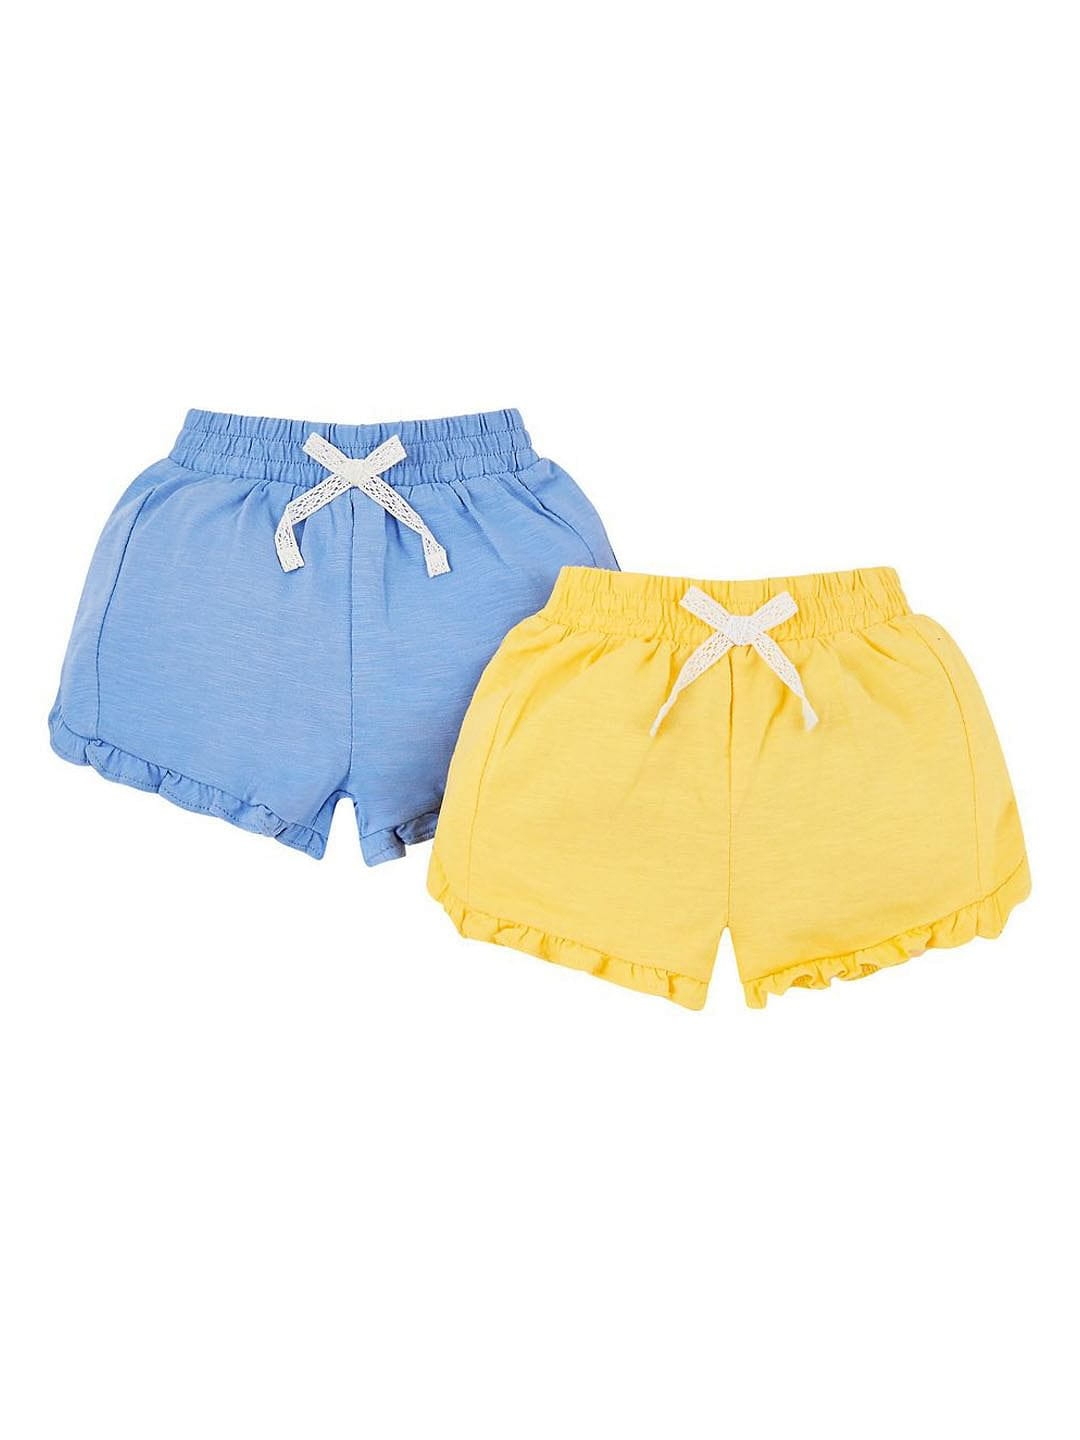 Yellow and Blue Printed Shorts - Pack of 2